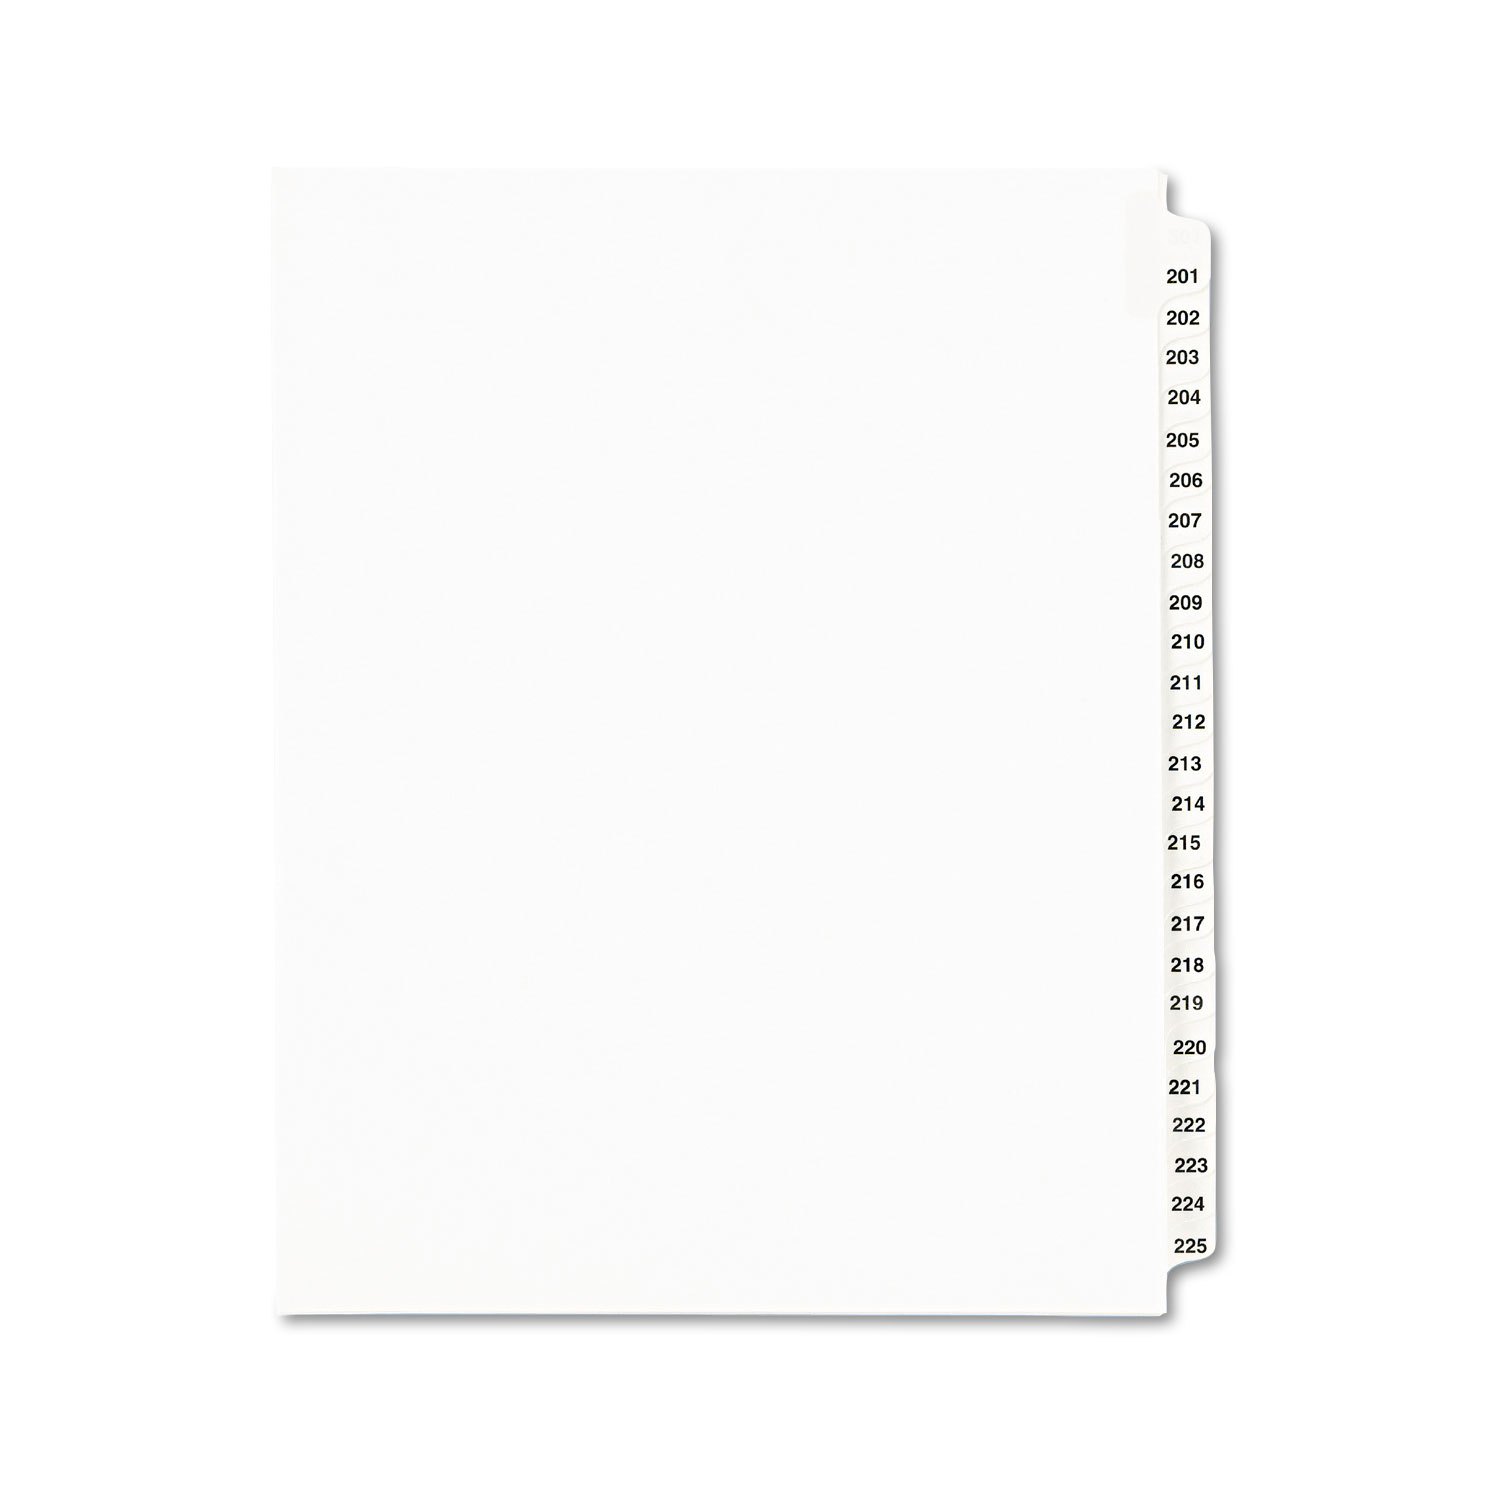  Avery 01338 Preprinted Legal Exhibit Side Tab Index Dividers, Avery Style, 25-Tab, 201 to 225, 11 x 8.5, White, 1 Set (AVE01338) 